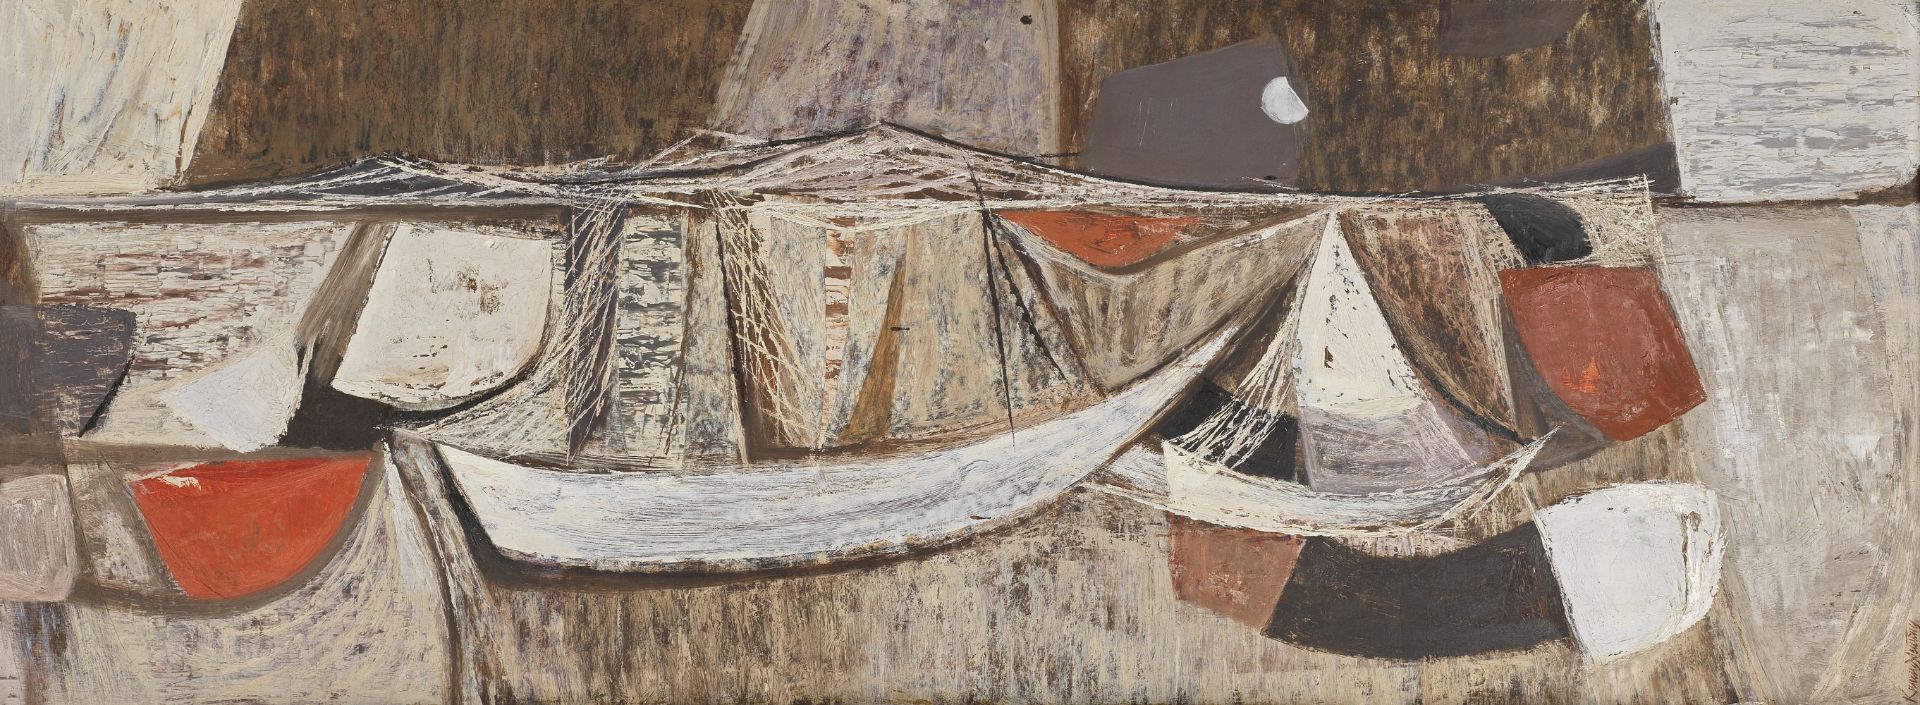 Kwong Yeu Ting (Chinese, 1922-2011) Abstract boats on a beach